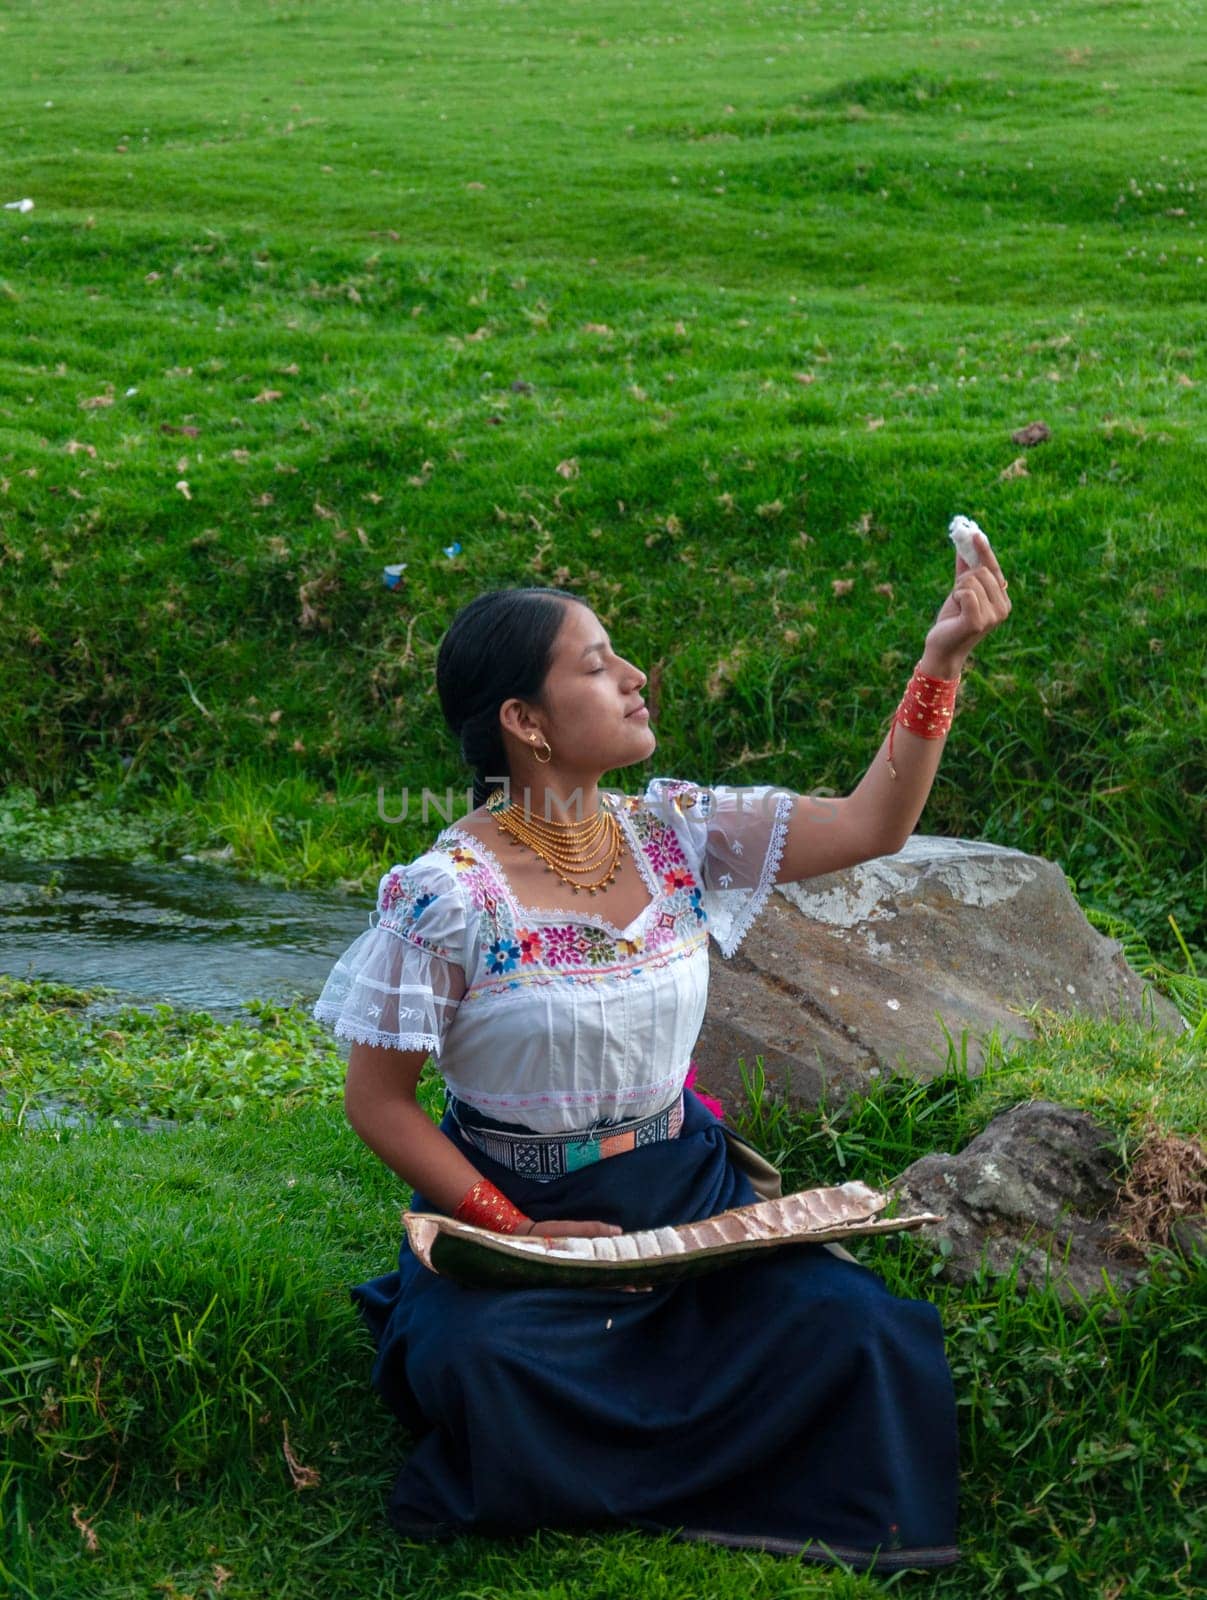 young indigenous girl making an offering to mother nature of the first guaba of the year's harvest, guaba day by Raulmartin